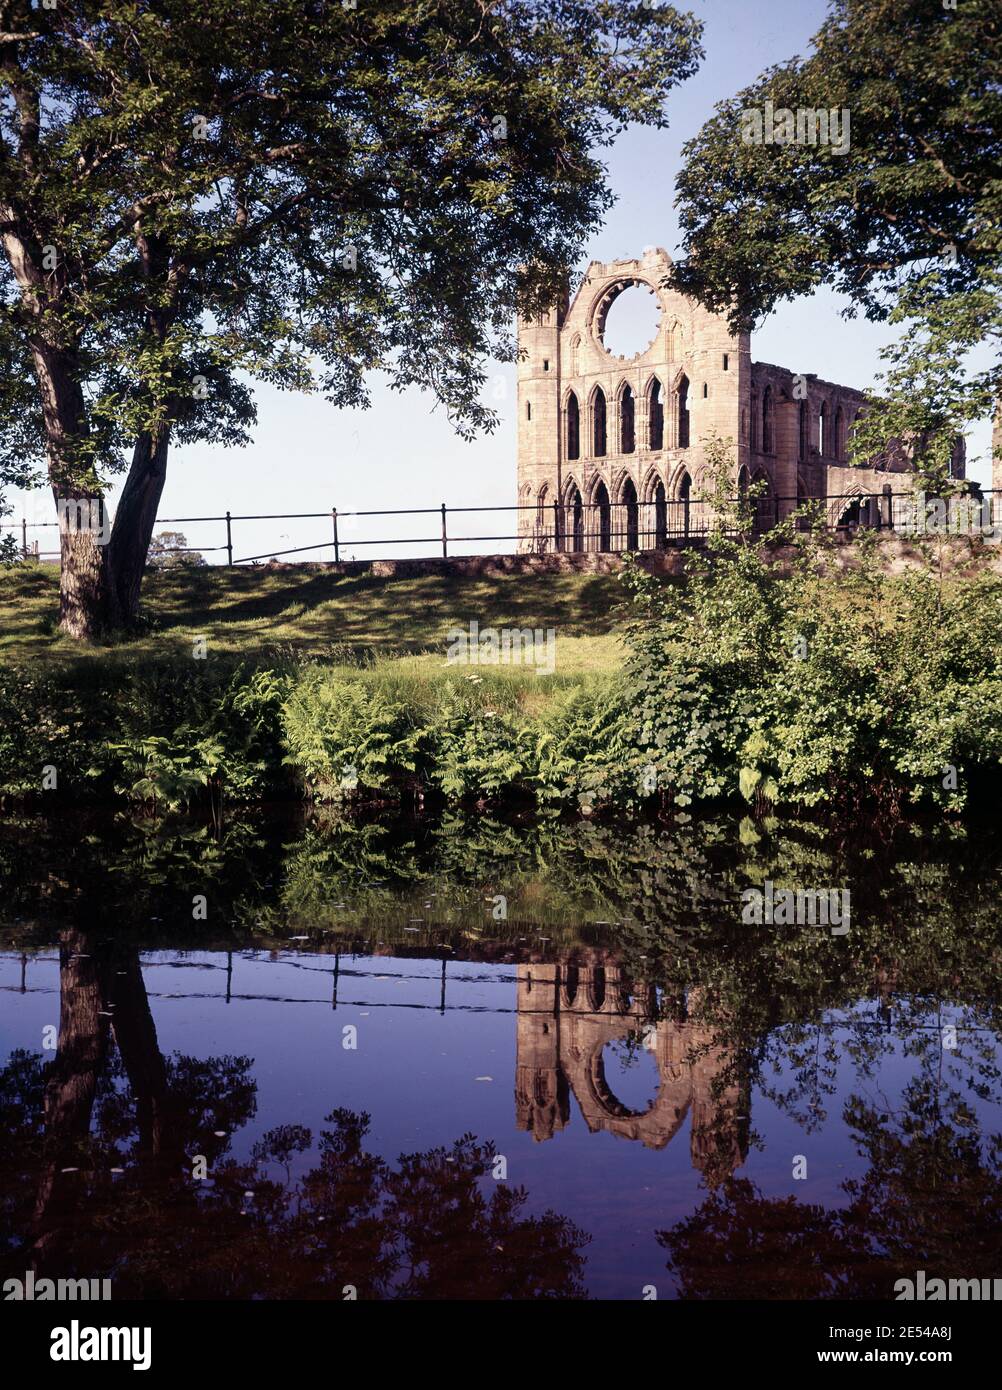 Scotland, Moray. Elgin Catherdral, one of the finest ecclesiastical monuments in Scotland. The River Lossie almost encircles the Royal Burgh of Elgin. Circa 1985. Photo by Tony Henshaw/Tom Parker Collection      Scanned from a 5'x4' Original transparency from a unique and stunning archive of original photography from the British Isles by photographer Tom Parker.    © World copyright. Stock Photo